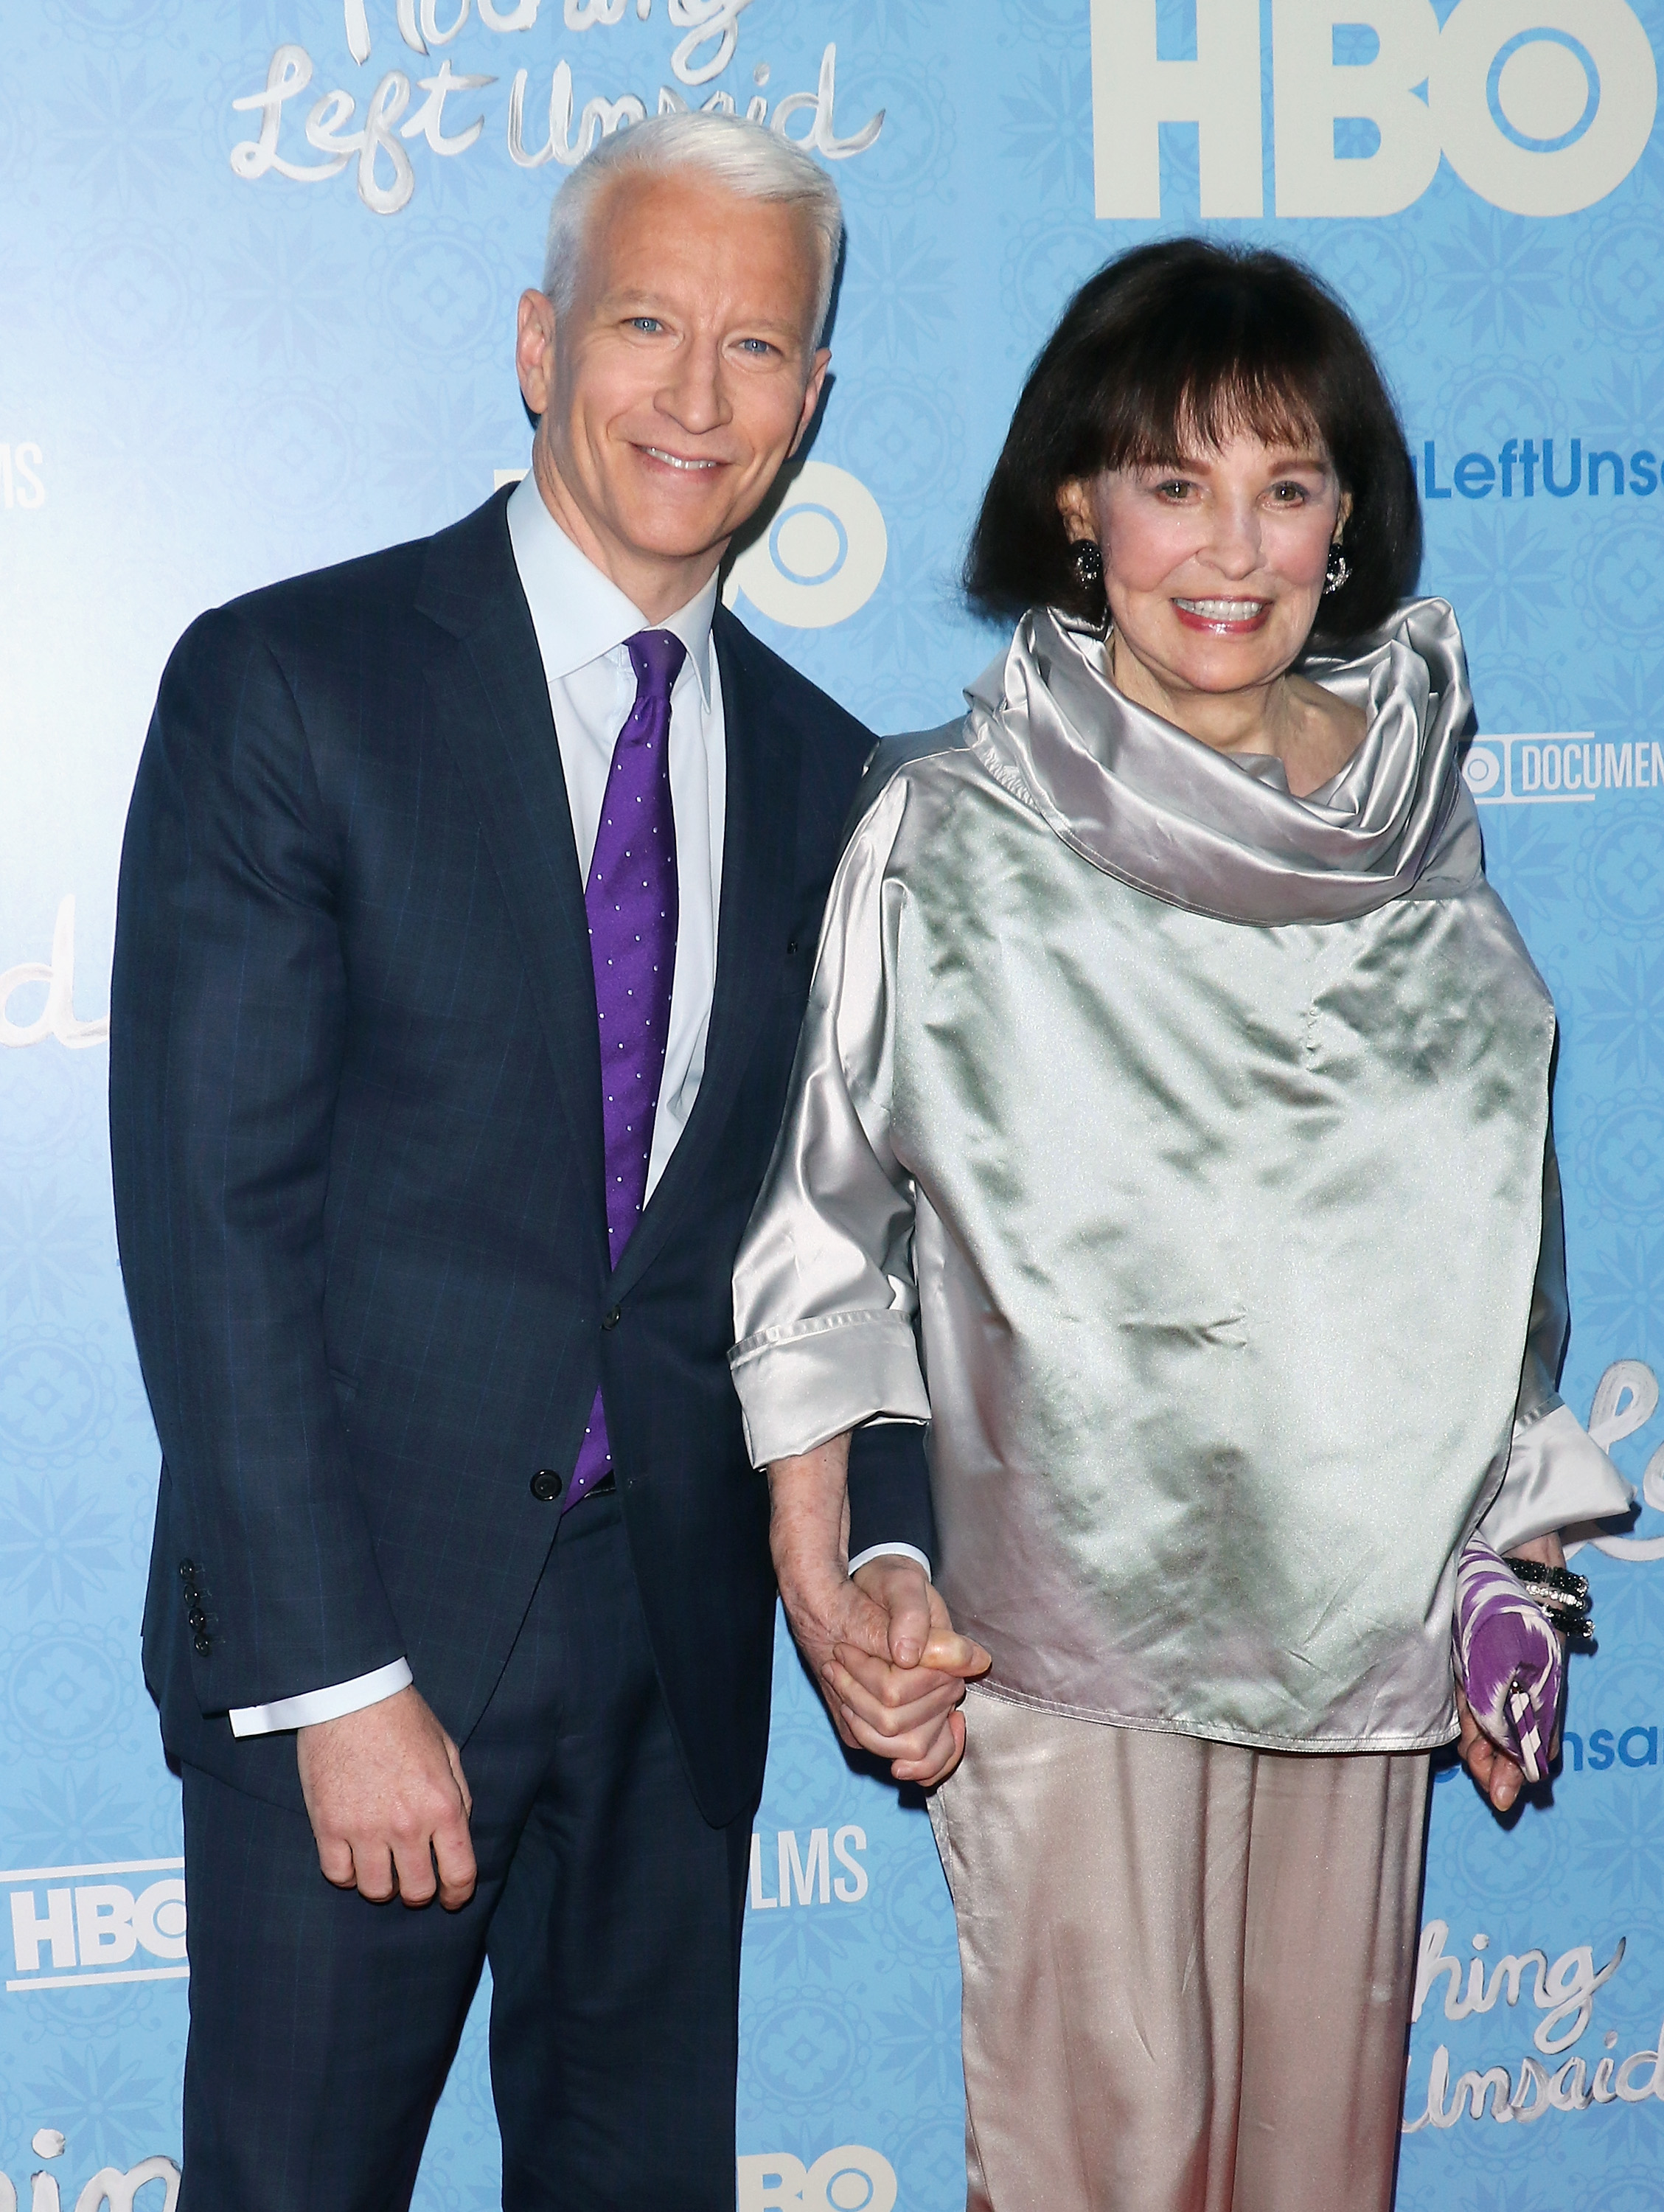 Anderson Cooper and his mother Gloria Vanderbilt at the "Nothing Left Unsaid" New York premiere at Time Warner Center, 2016. | Source: Getty Images